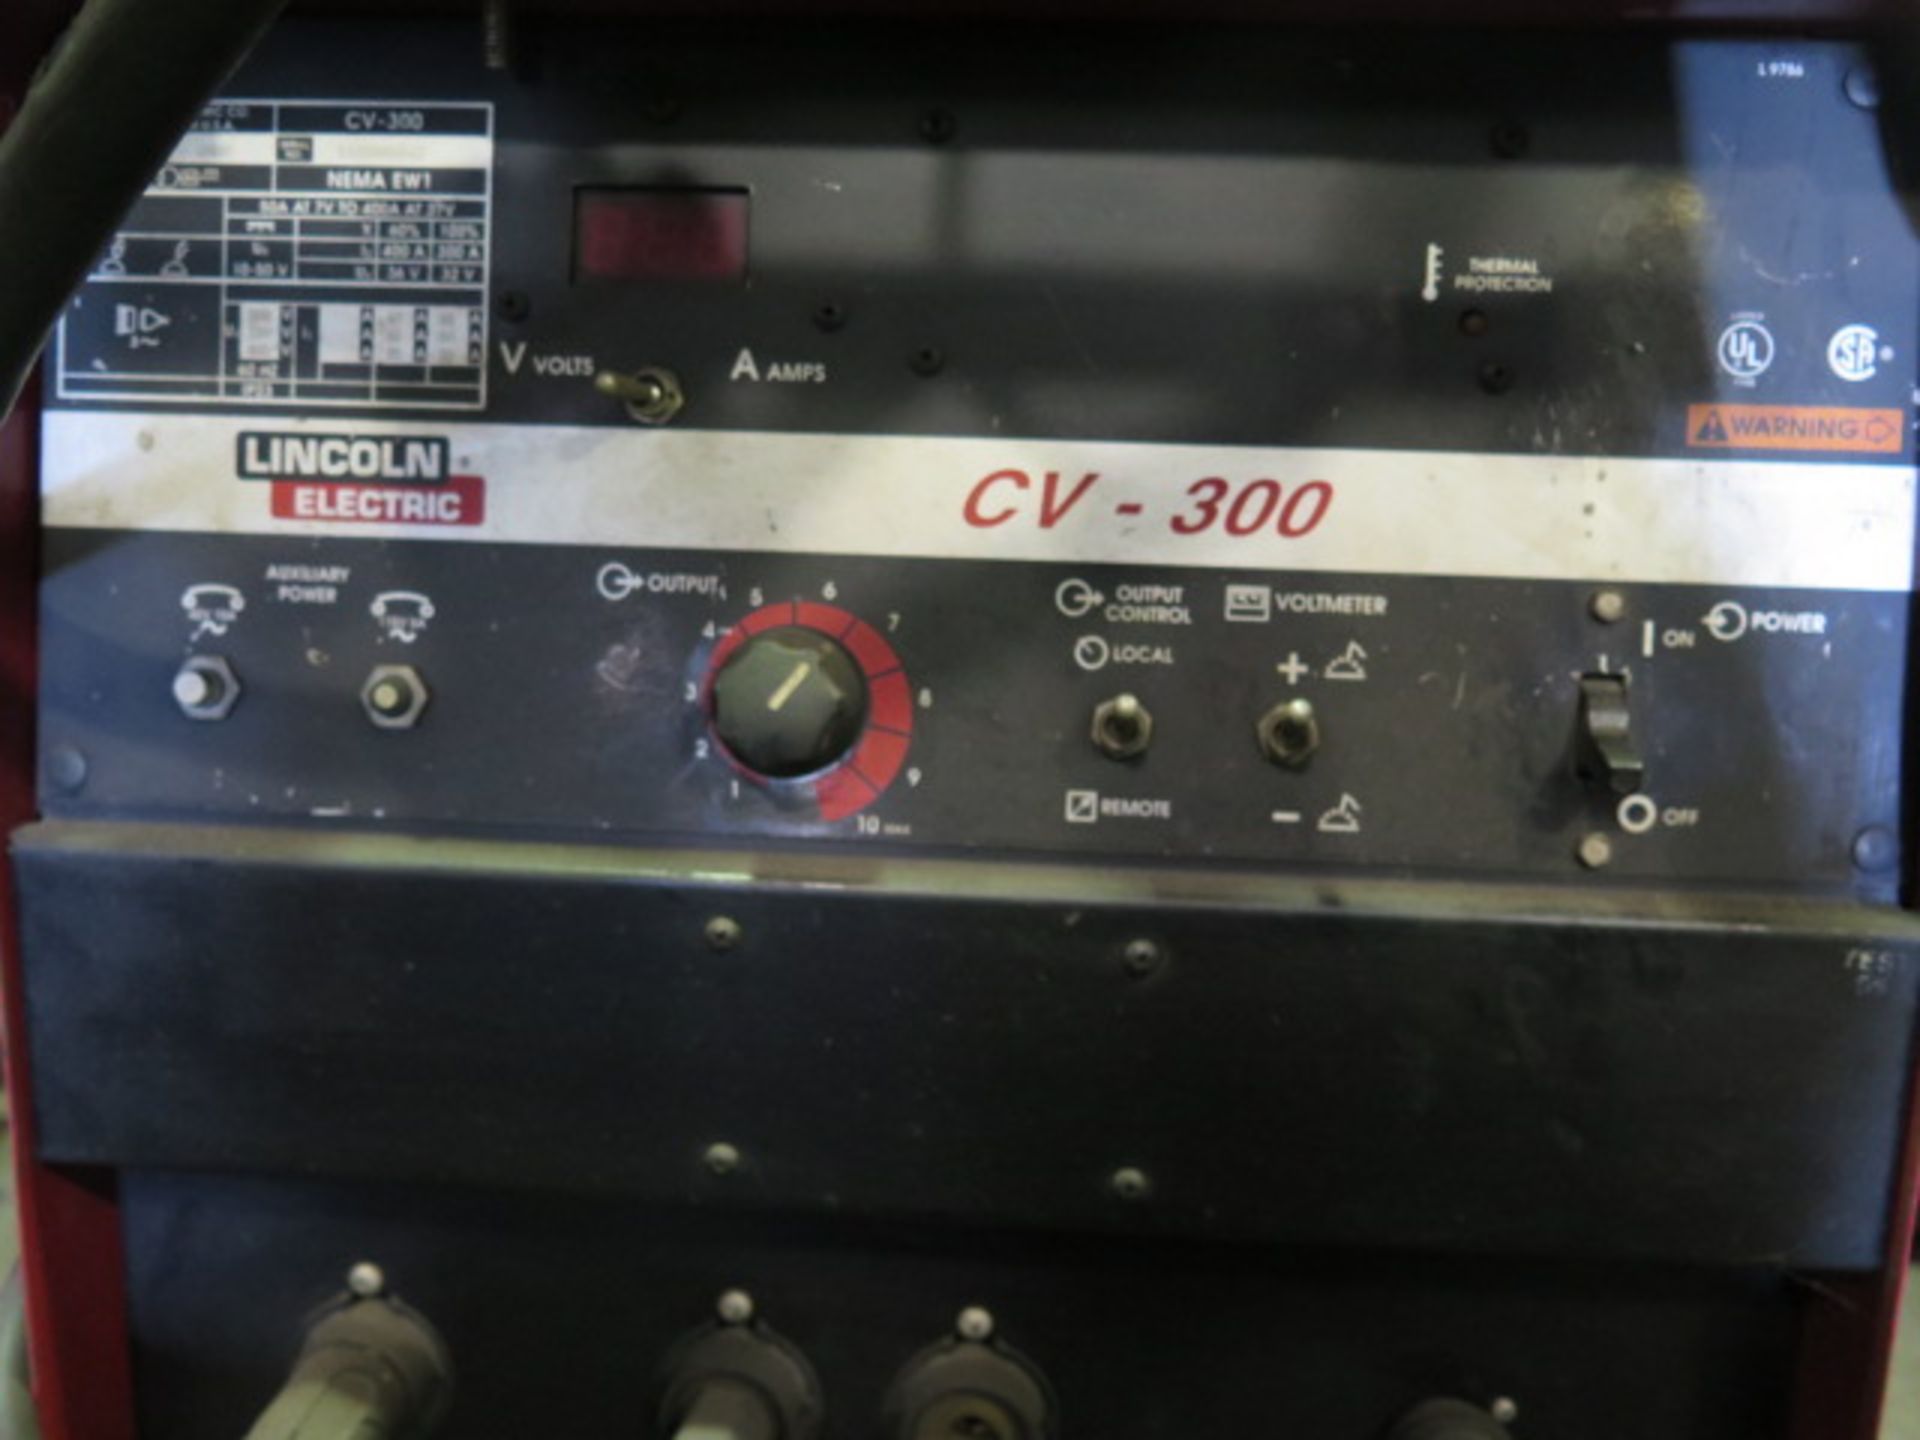 Lincoln CV-300 Arc Welding Power Source w/ Lincoln LN-7 Wire Feed (SOLD AS-IS - NO WARRANTY) - Image 3 of 12